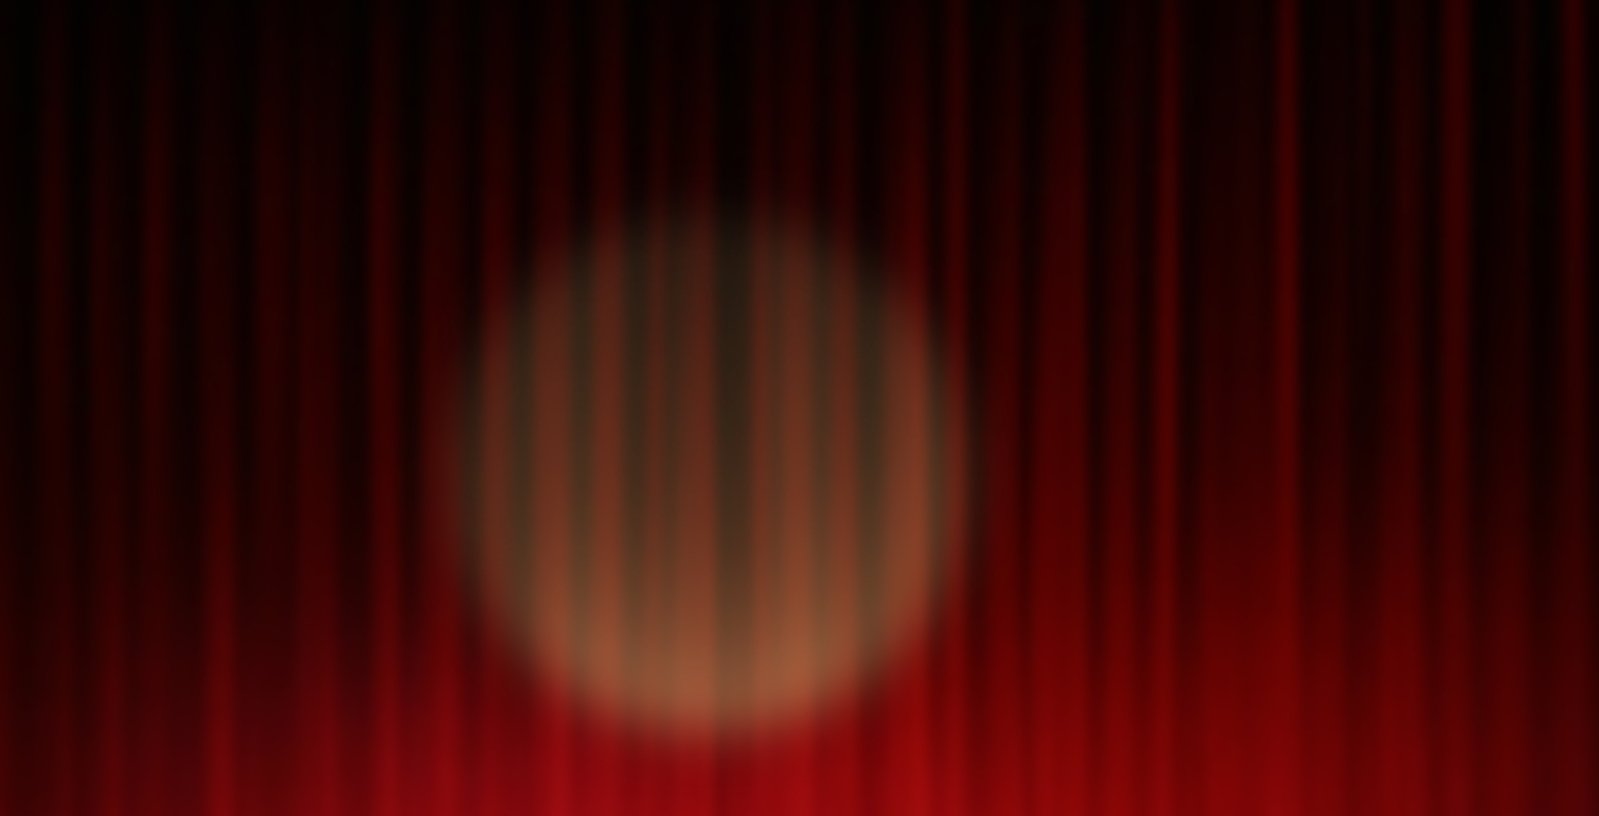 an abstract background of red and black curtains